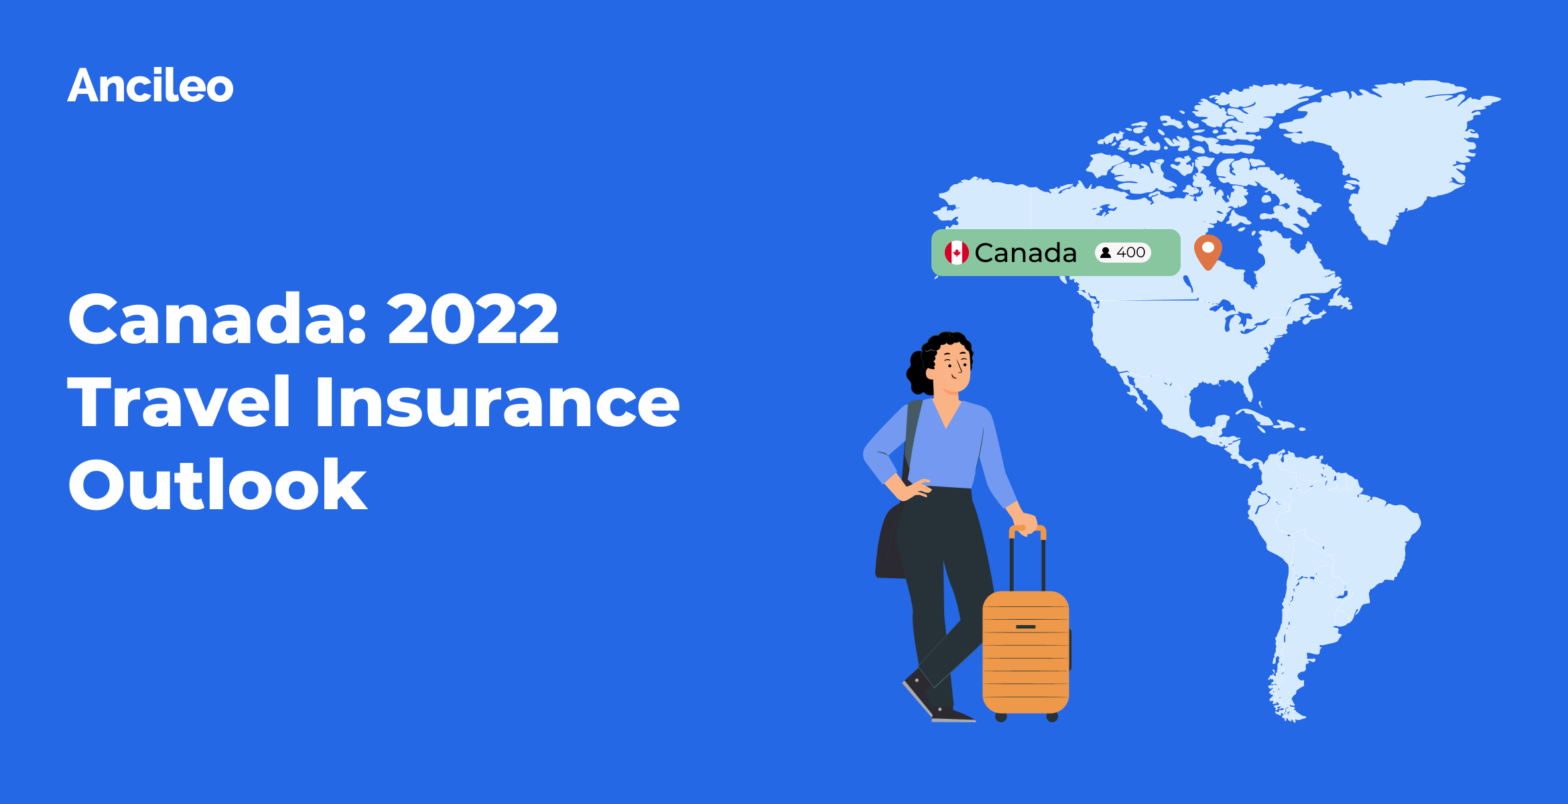 Canada: 2022 Travel Insurance Outlook